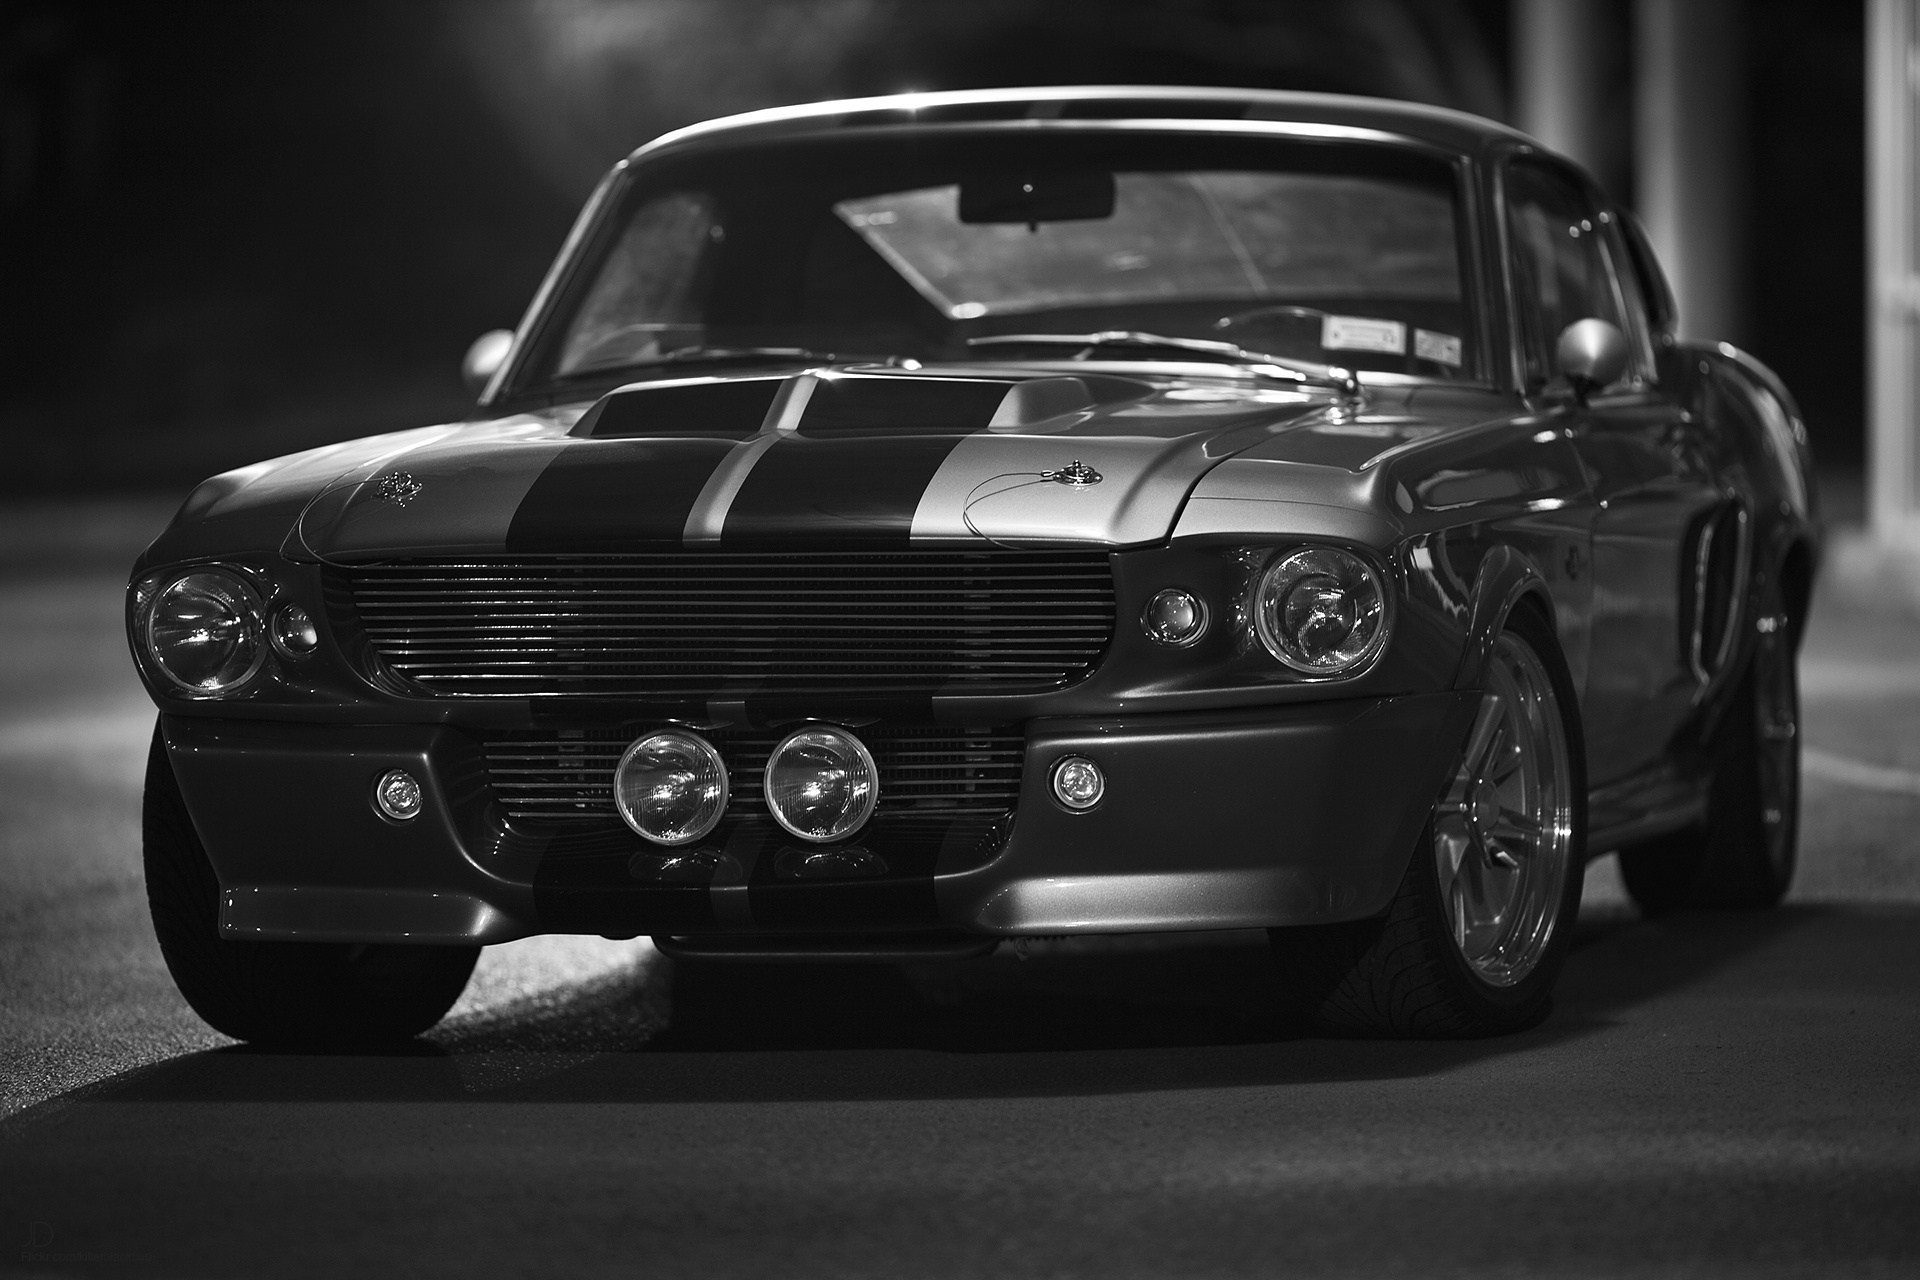 Ford Mustang GT500, Eleanor sleek lines, Automotive photography, Muscle car heritage, Road presence, 1920x1280 HD Desktop